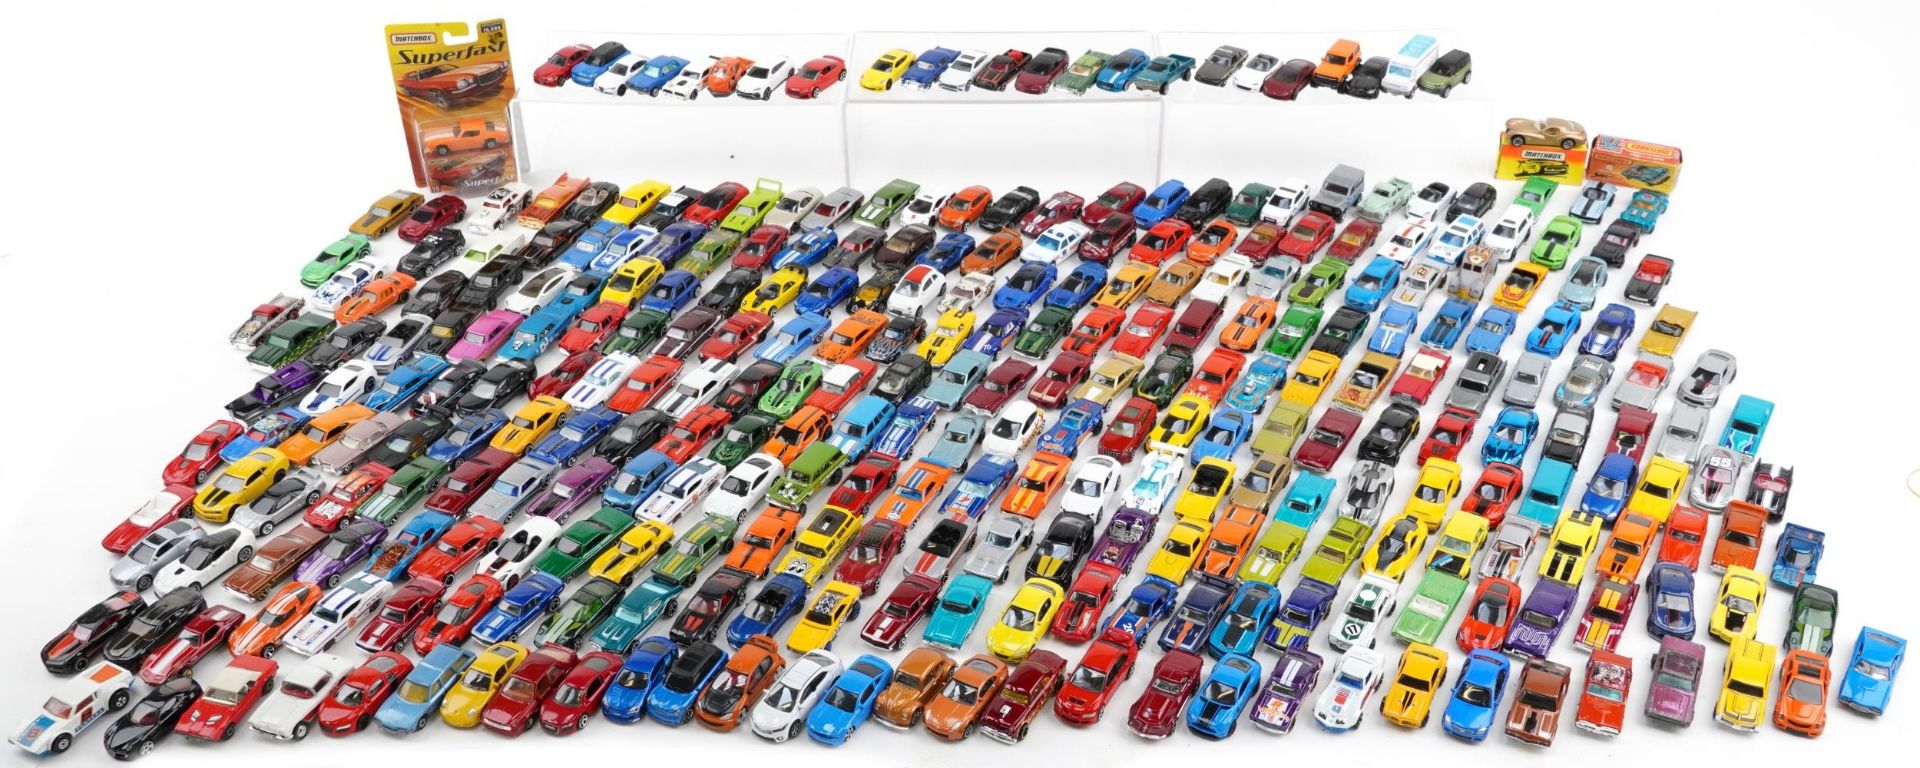 Large collection of diecast vehicles, predominantly Matchbox and Hot Wheels